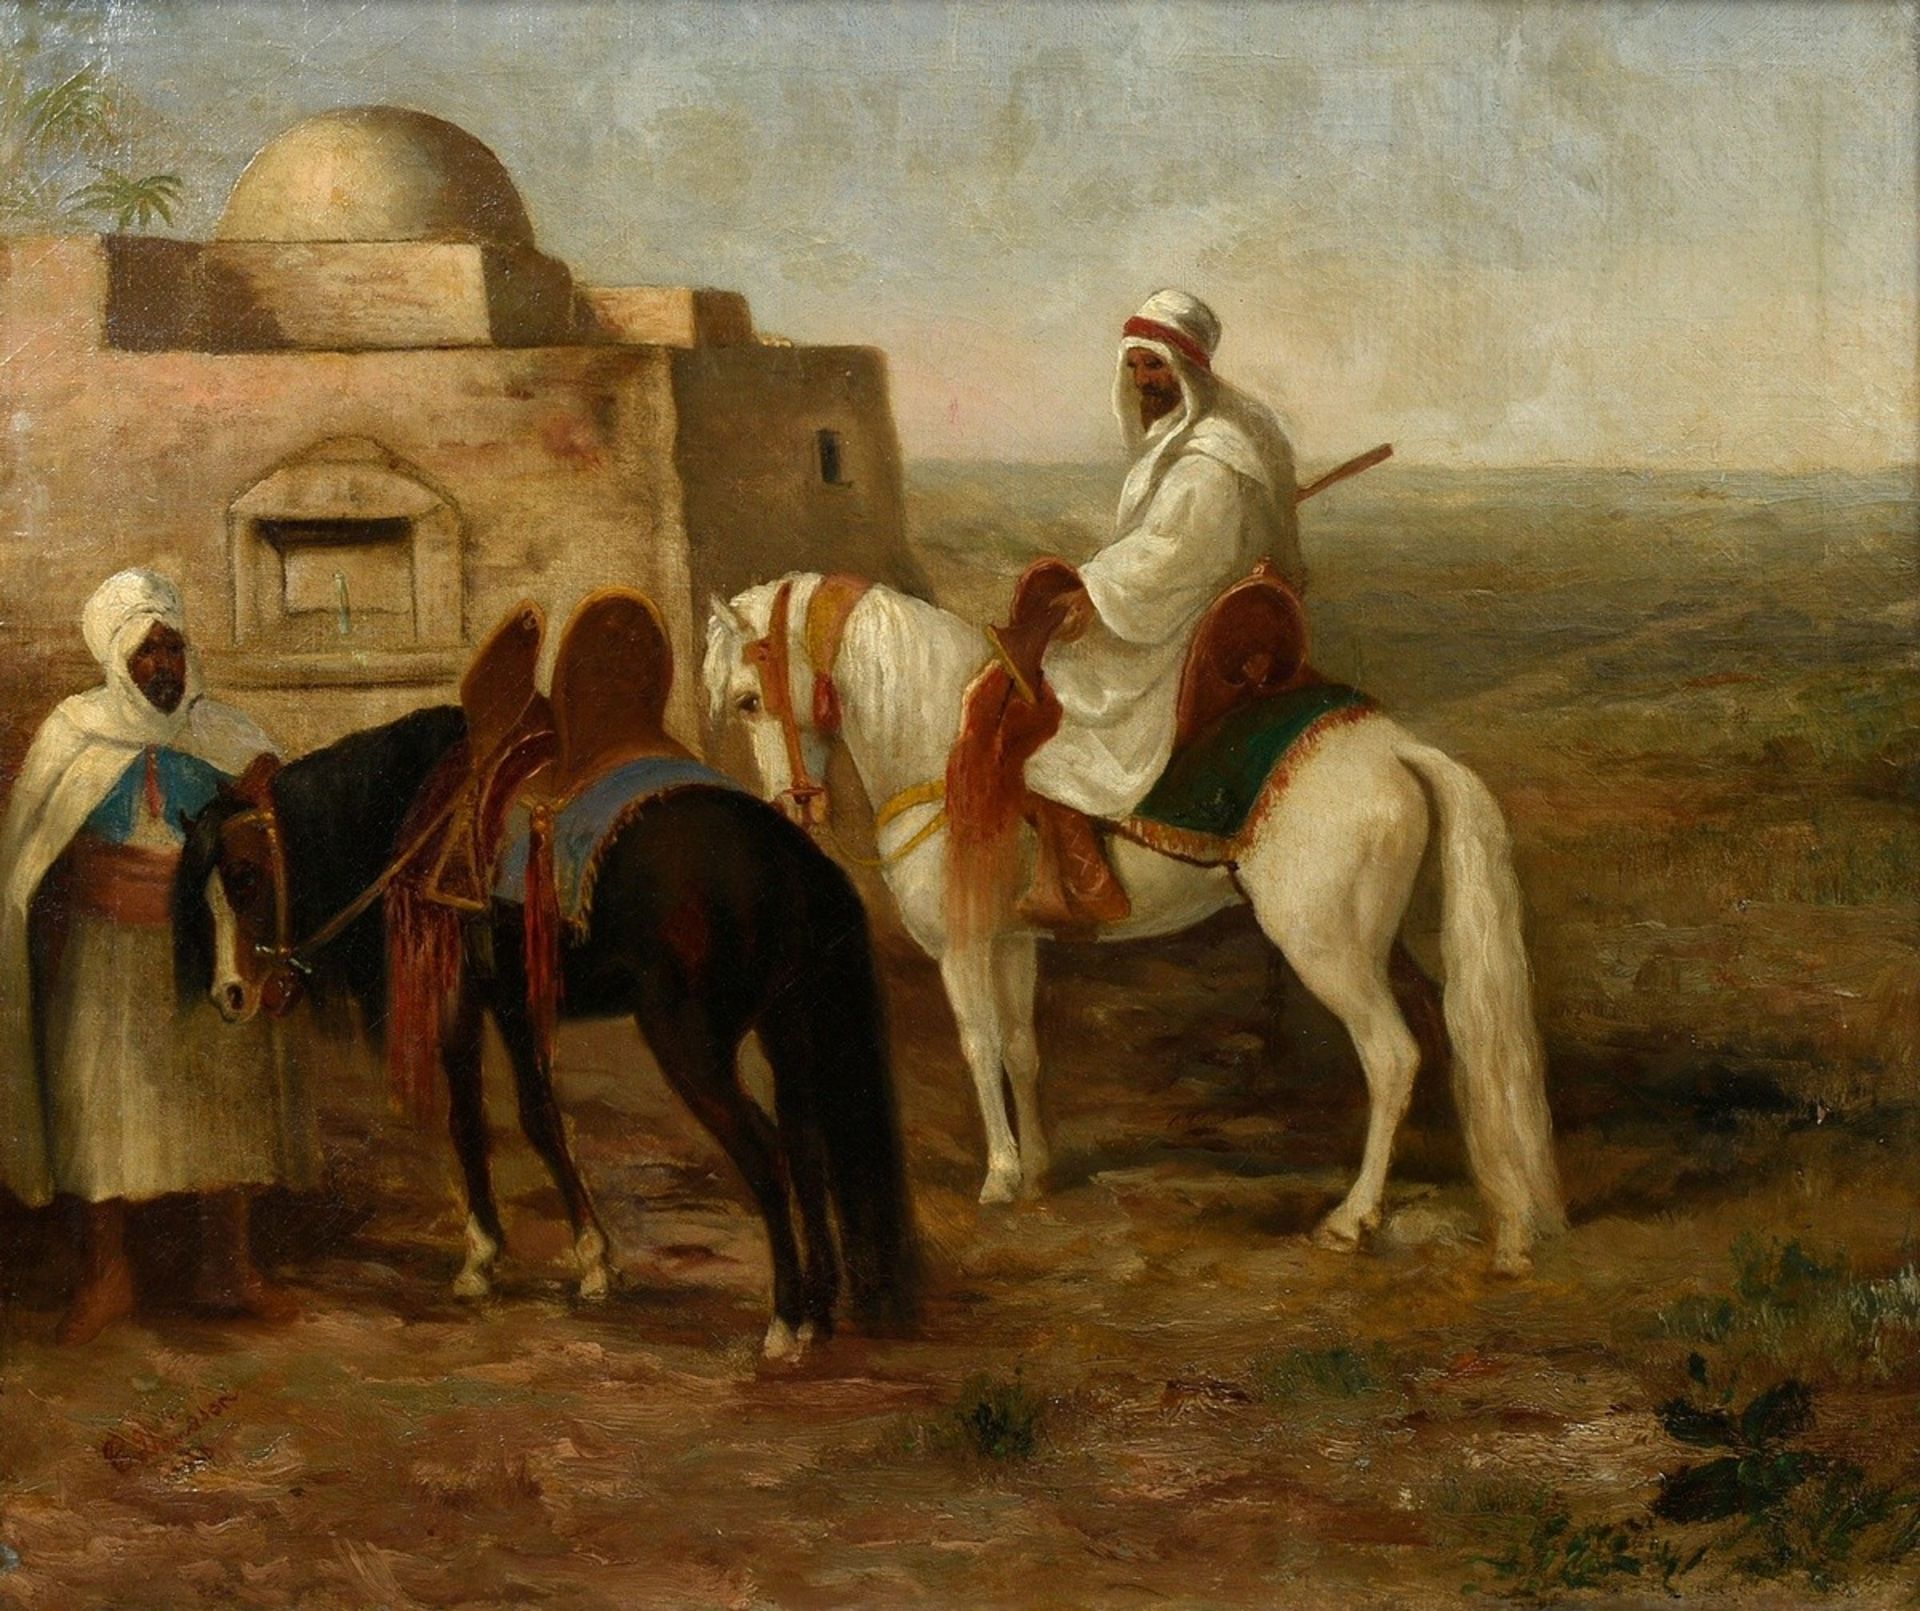 Davidson, Charles Grant (1824-1902) "Two Arabs with Horses outside the City", oil/canvas probably d